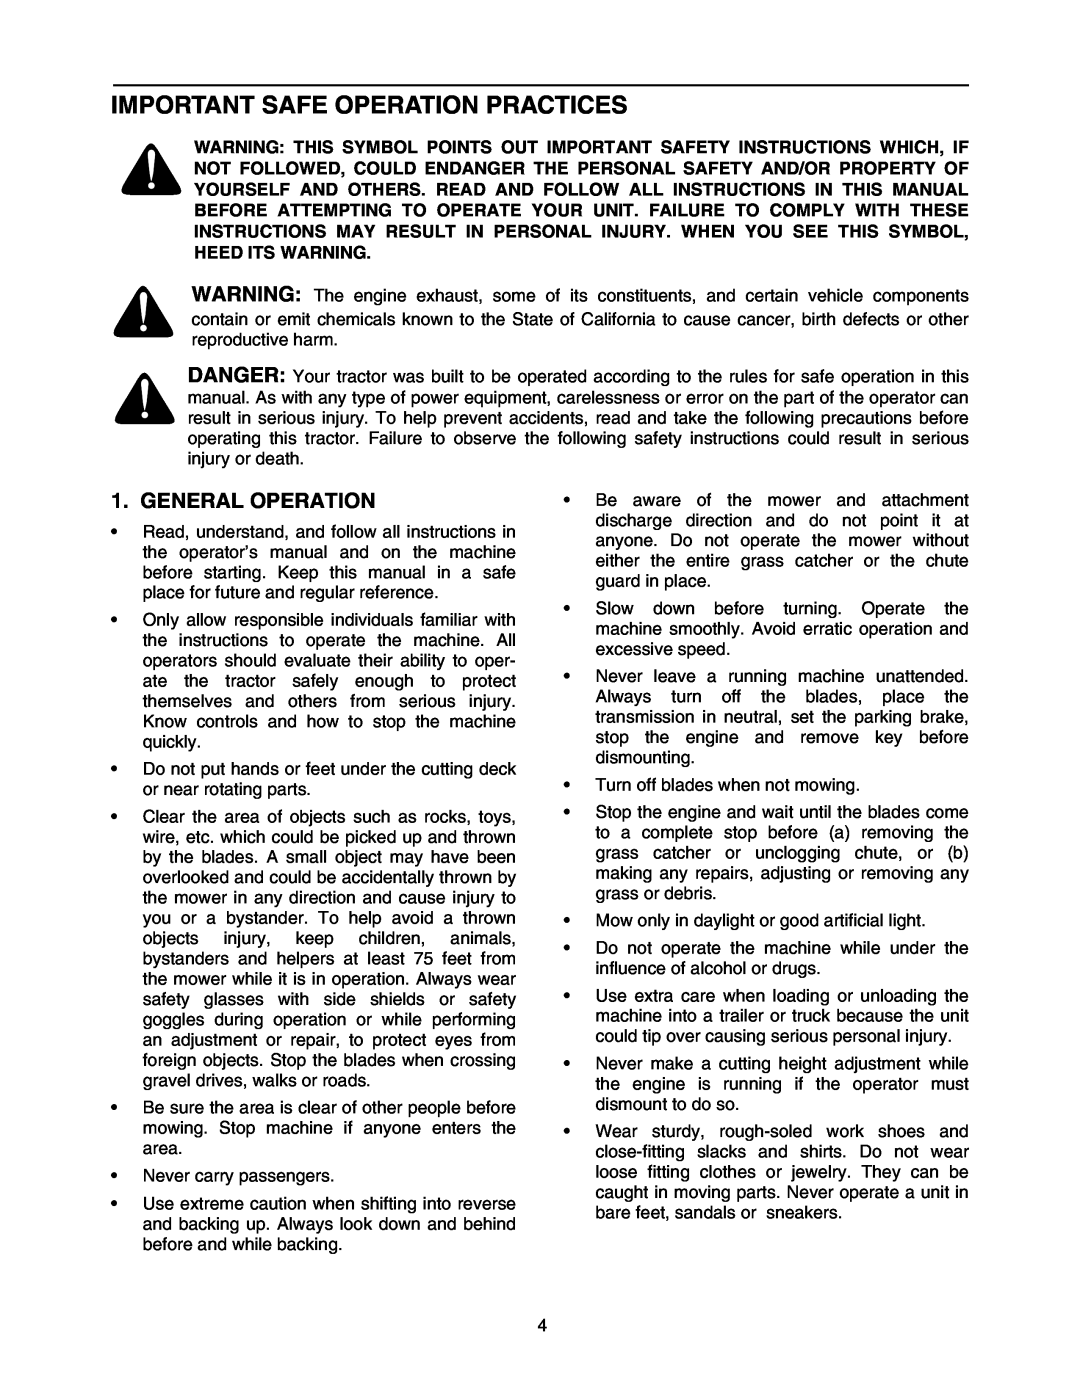 Cub Cadet 5254 manual Important Safe Operation Practices, General Operation 